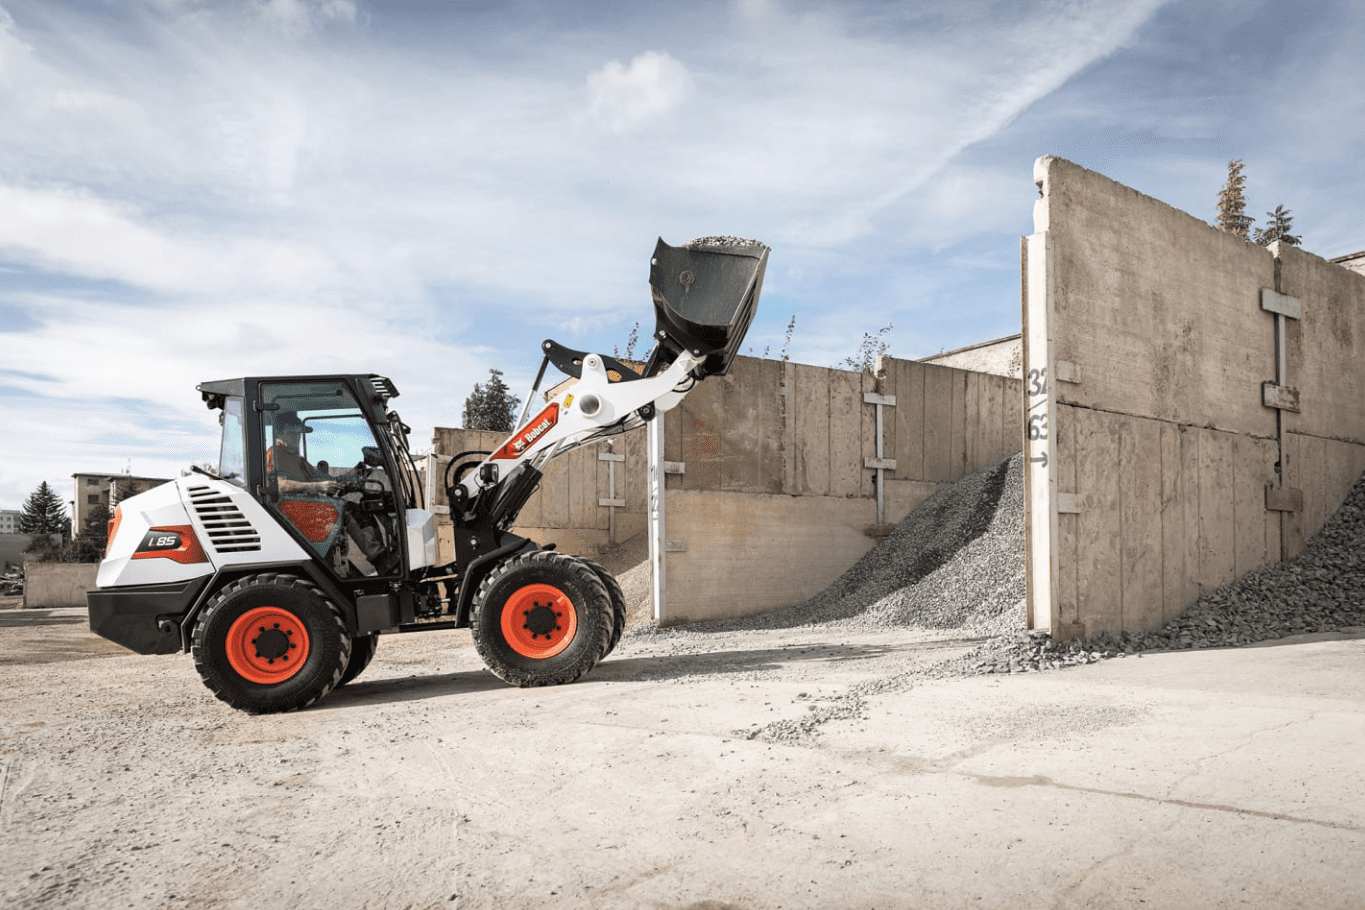 Browse Specs and more for the Bobcat L85 Compact Wheel Loader - Bobcat of the Rockies